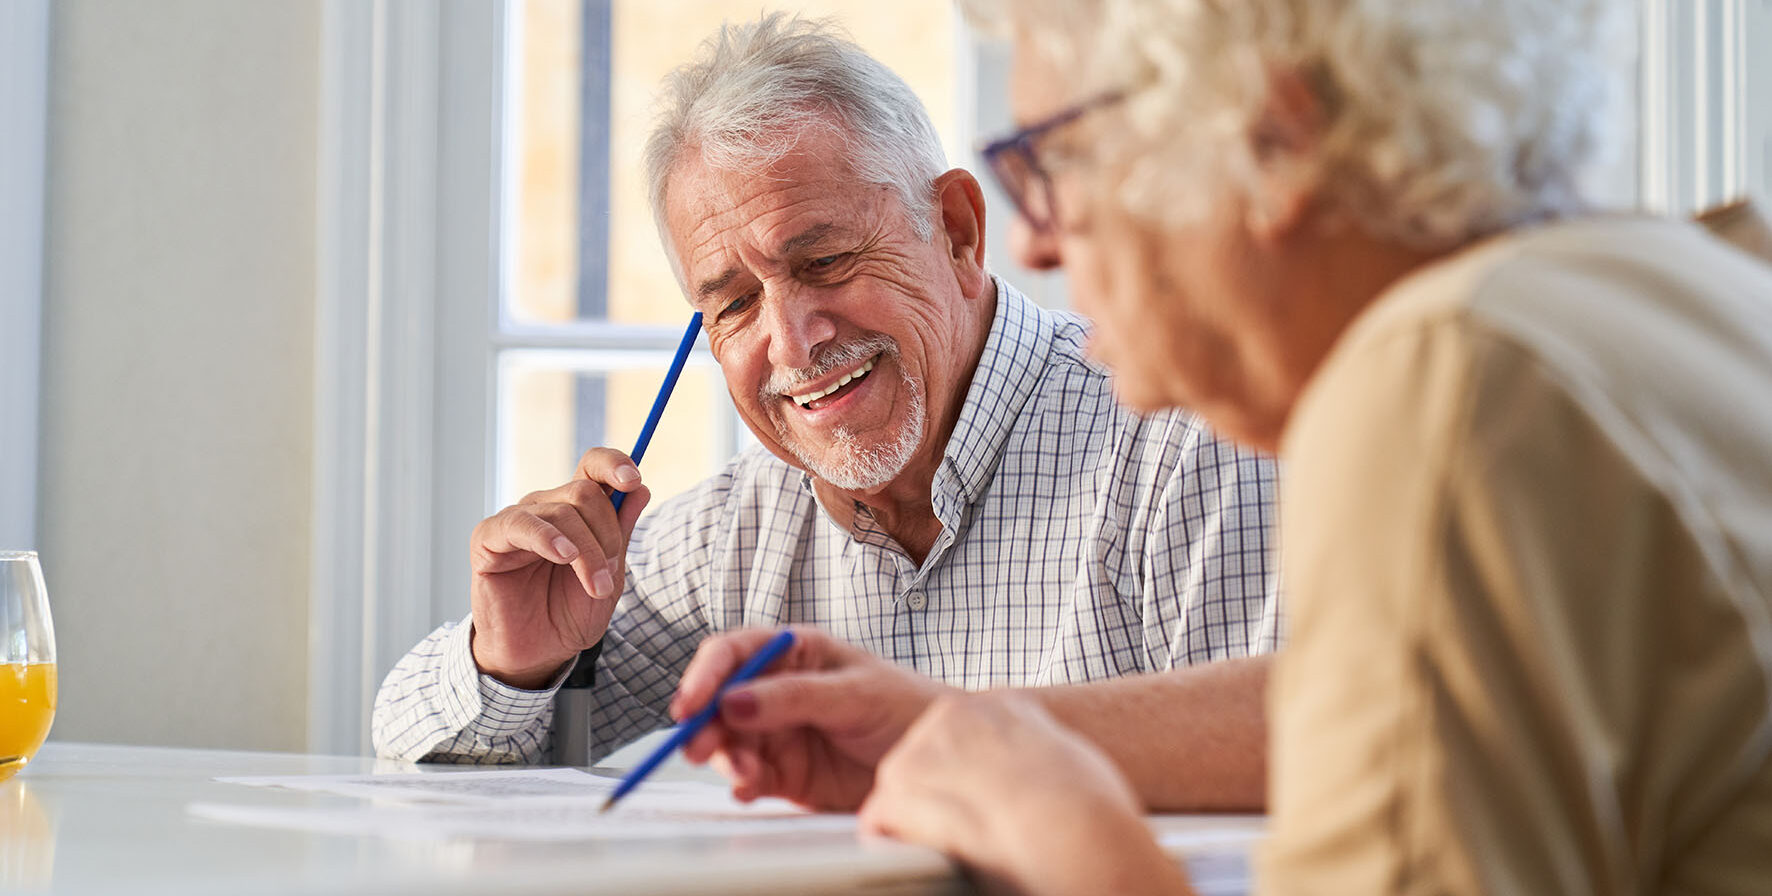 An older man and older lady look at paperwork. They have pencils in their hand. The lady is out of focus and the man is the main focus of the image. the man is smiling. They are in a home setting.